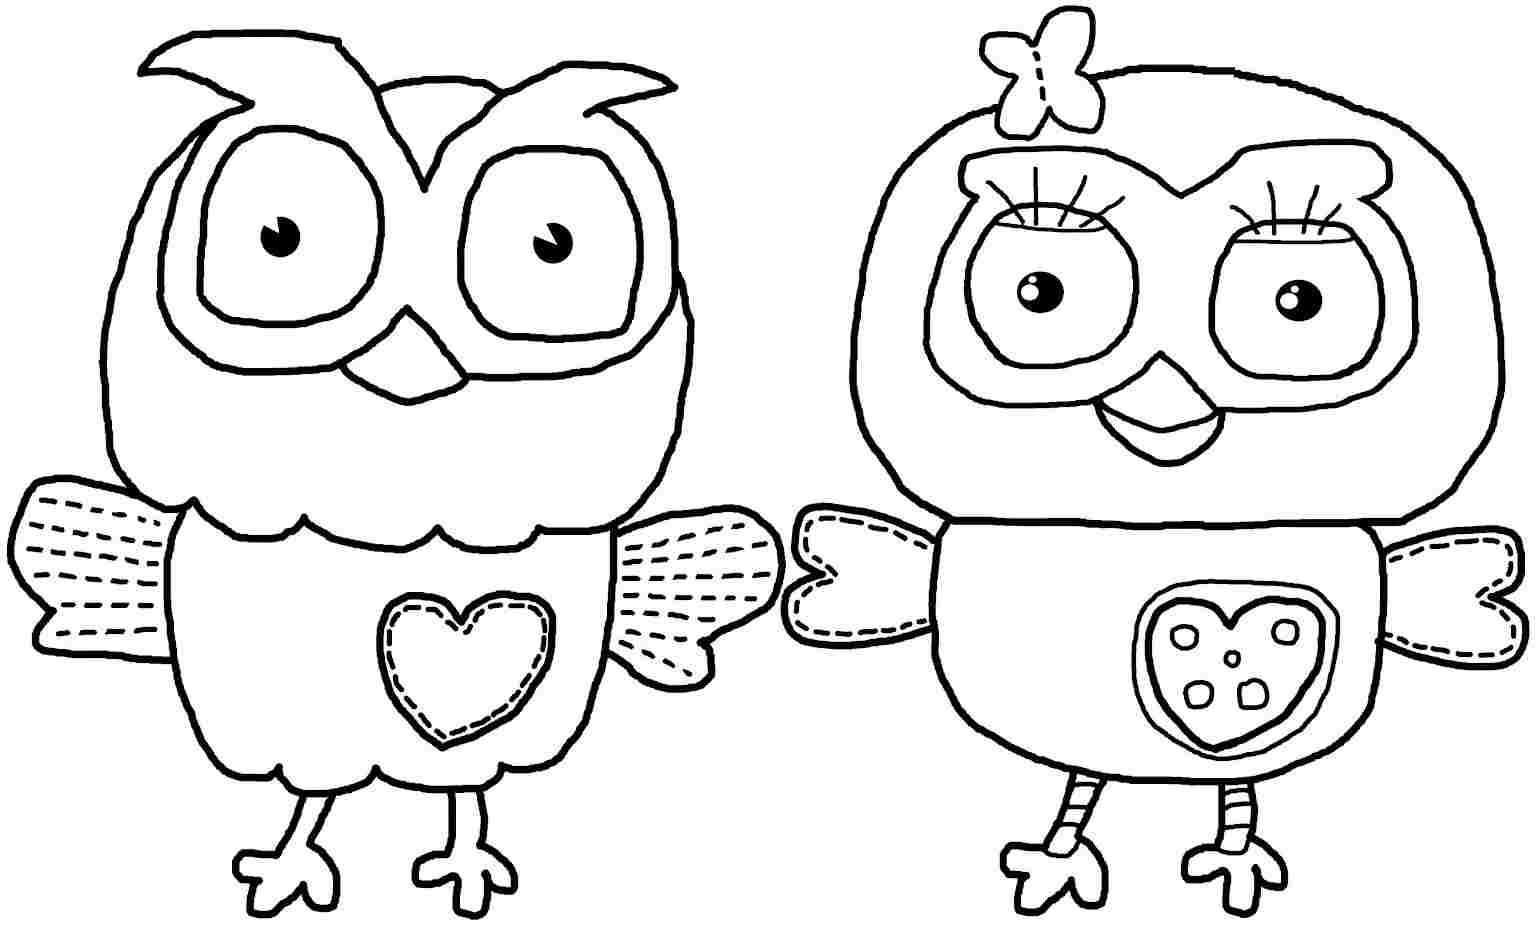 Fun Coloring Pages For Boys Fall
 owl coloring pages printable free